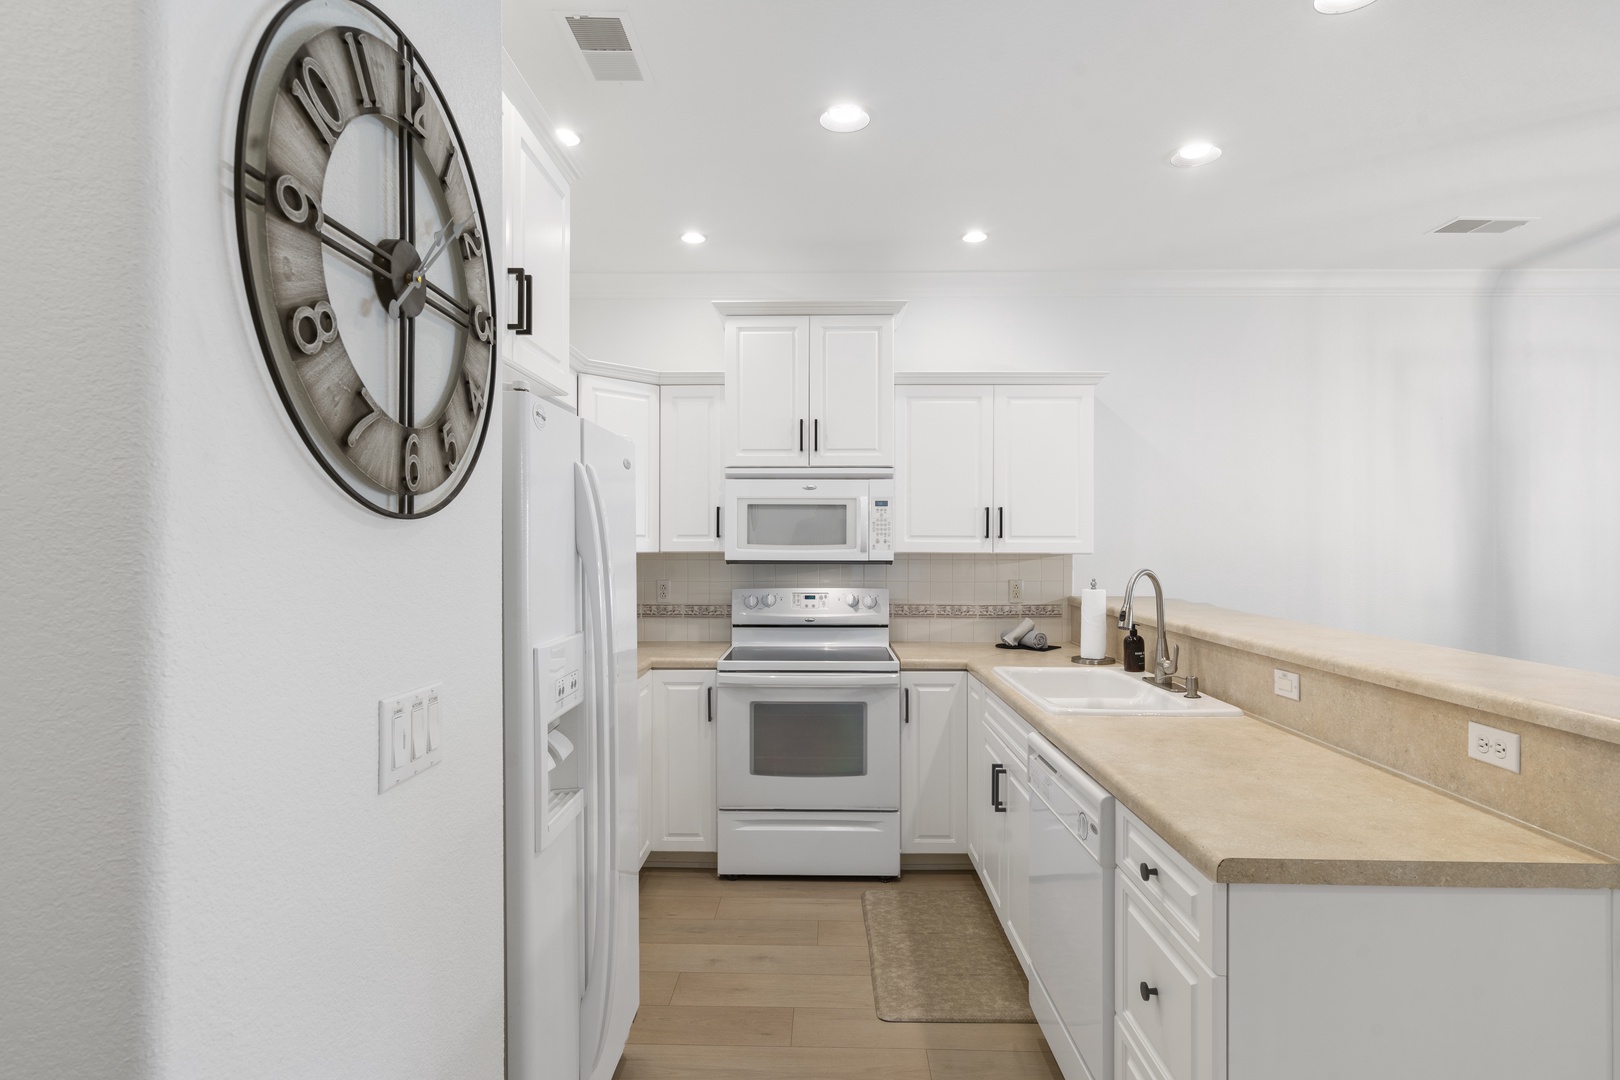 The fully equipped kitchen offers ample counter and storage space